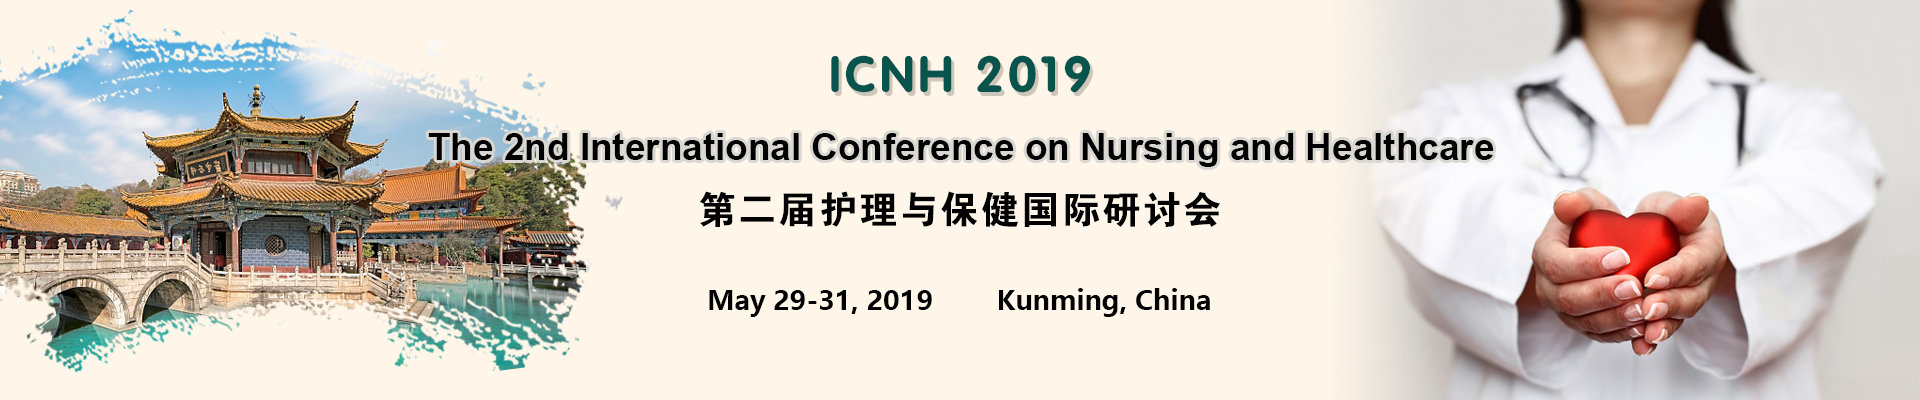 2nd Int. Conf. on Nursing and Healthcare